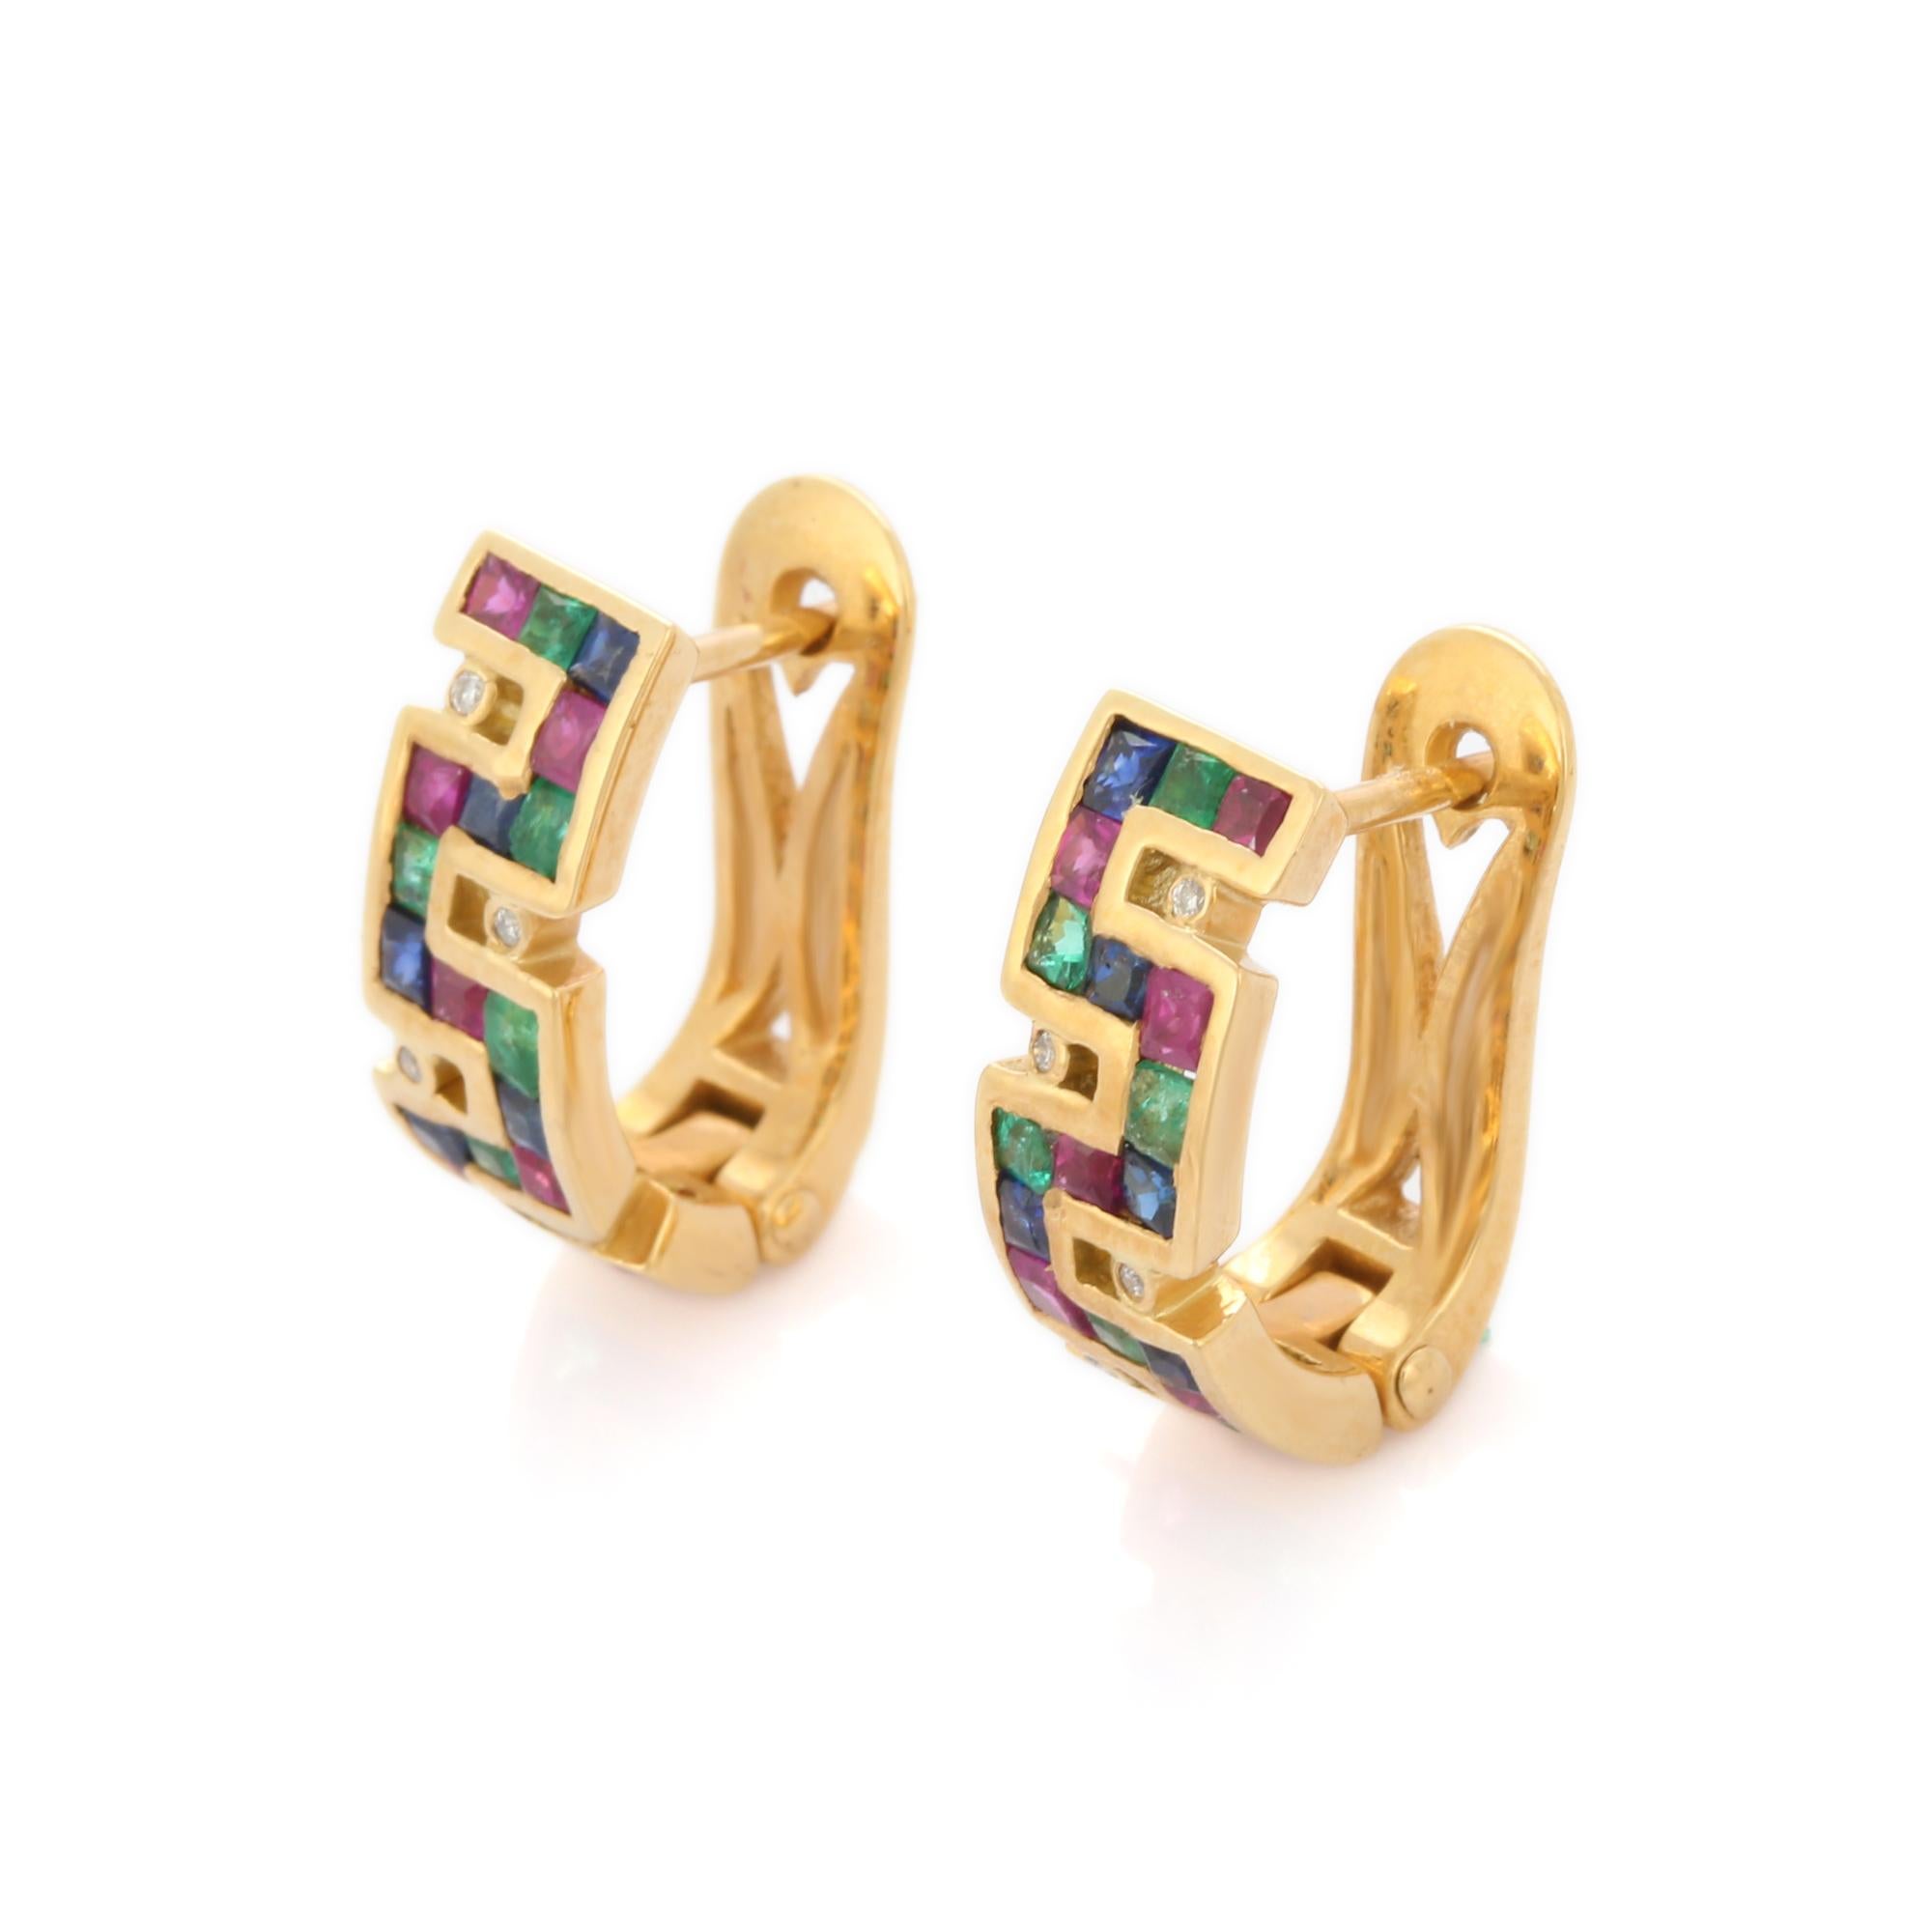 Studs create a subtle beauty while showcasing the colors of the natural precious gemstones and illuminating diamonds making a statement.

Square cut emerald, ruby, sapphire studs with diamonds in 18K gold. Embrace your look with these stunning pair